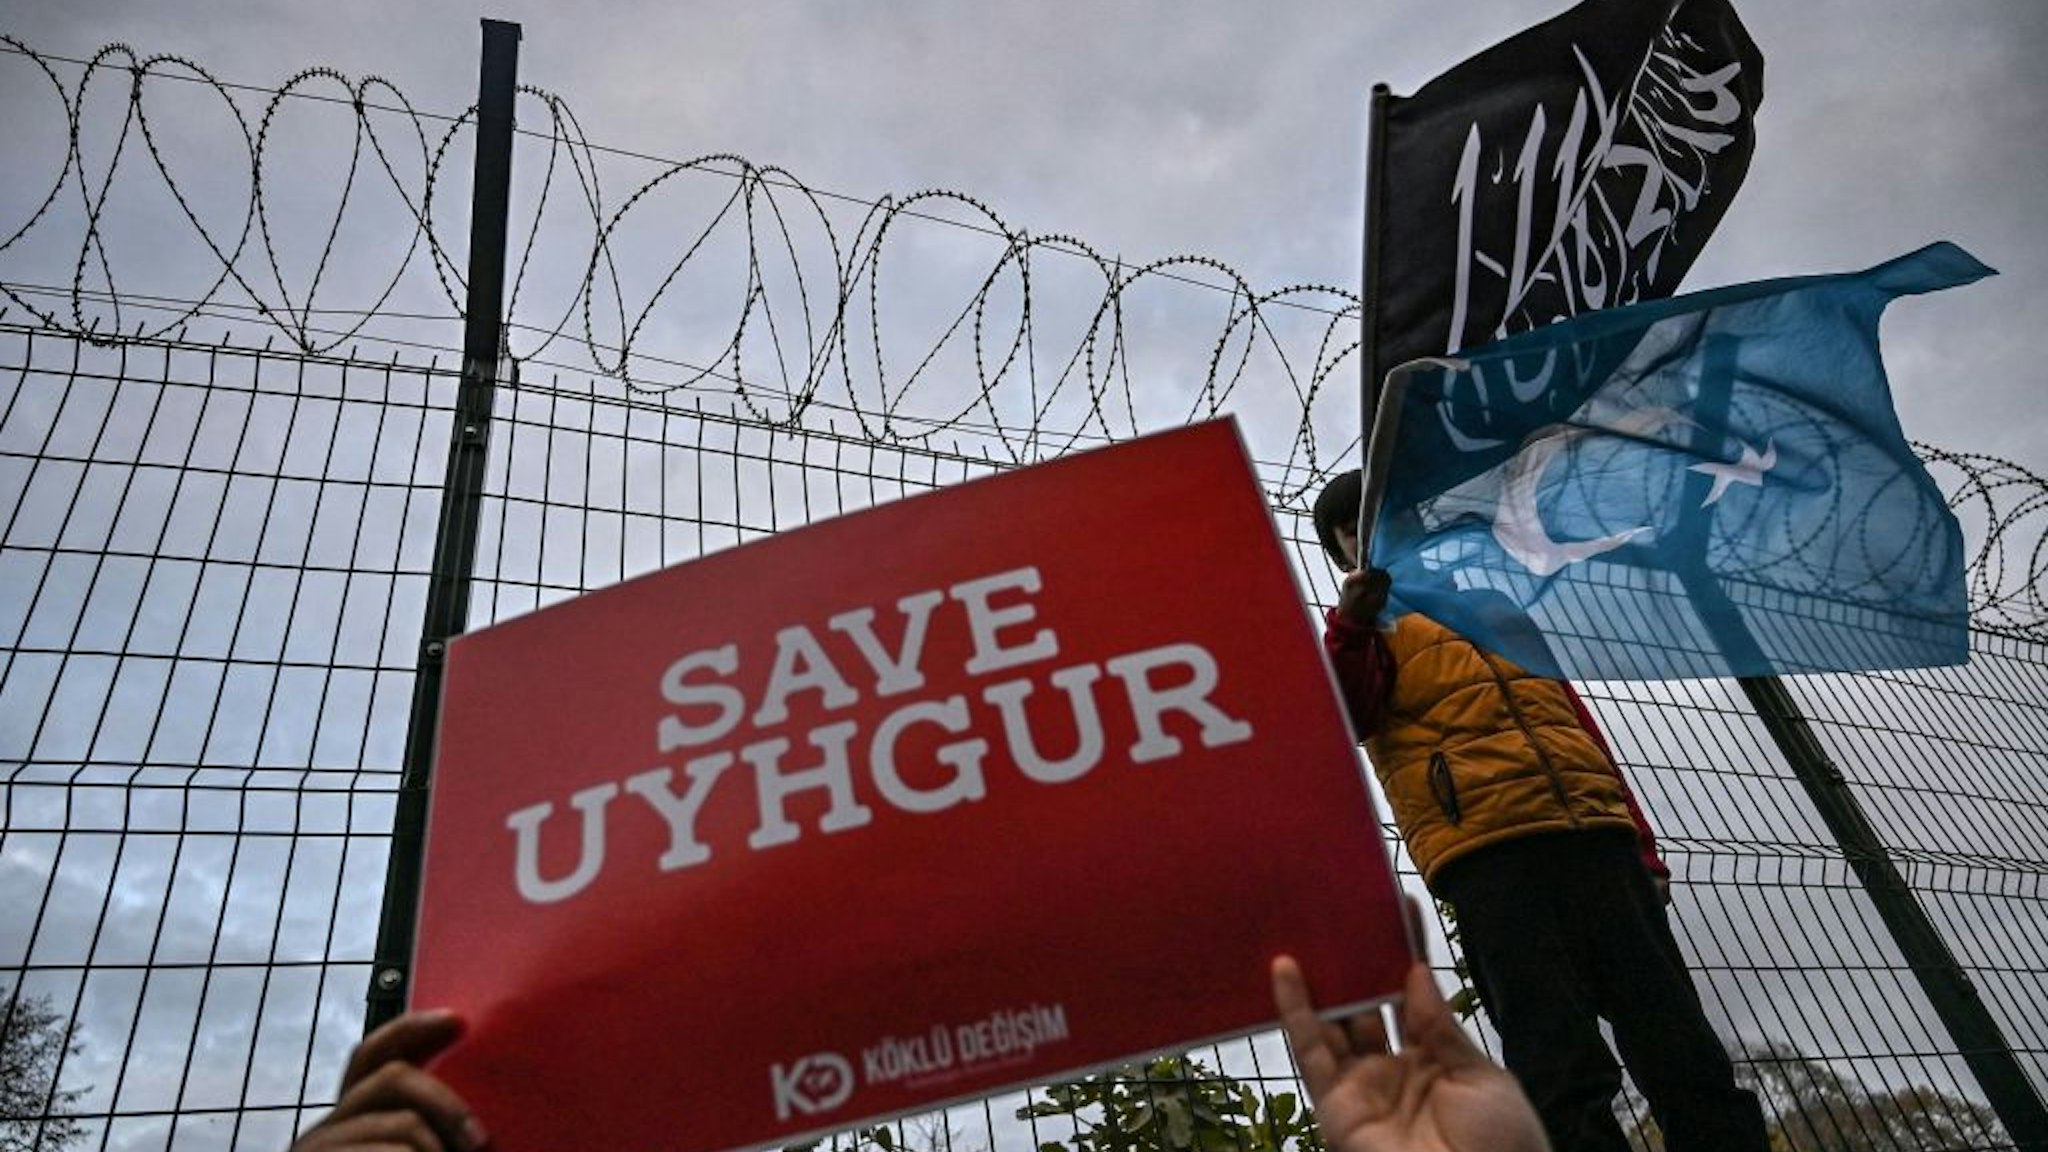 A supporters of China's Muslim Uighur minority holds a placard reading "Save Uighur" as a boy waves the flag of East Turkestan and an Islamic black flag on December 13, 2019 during a demostration in front of China Consulate in Istanbul.